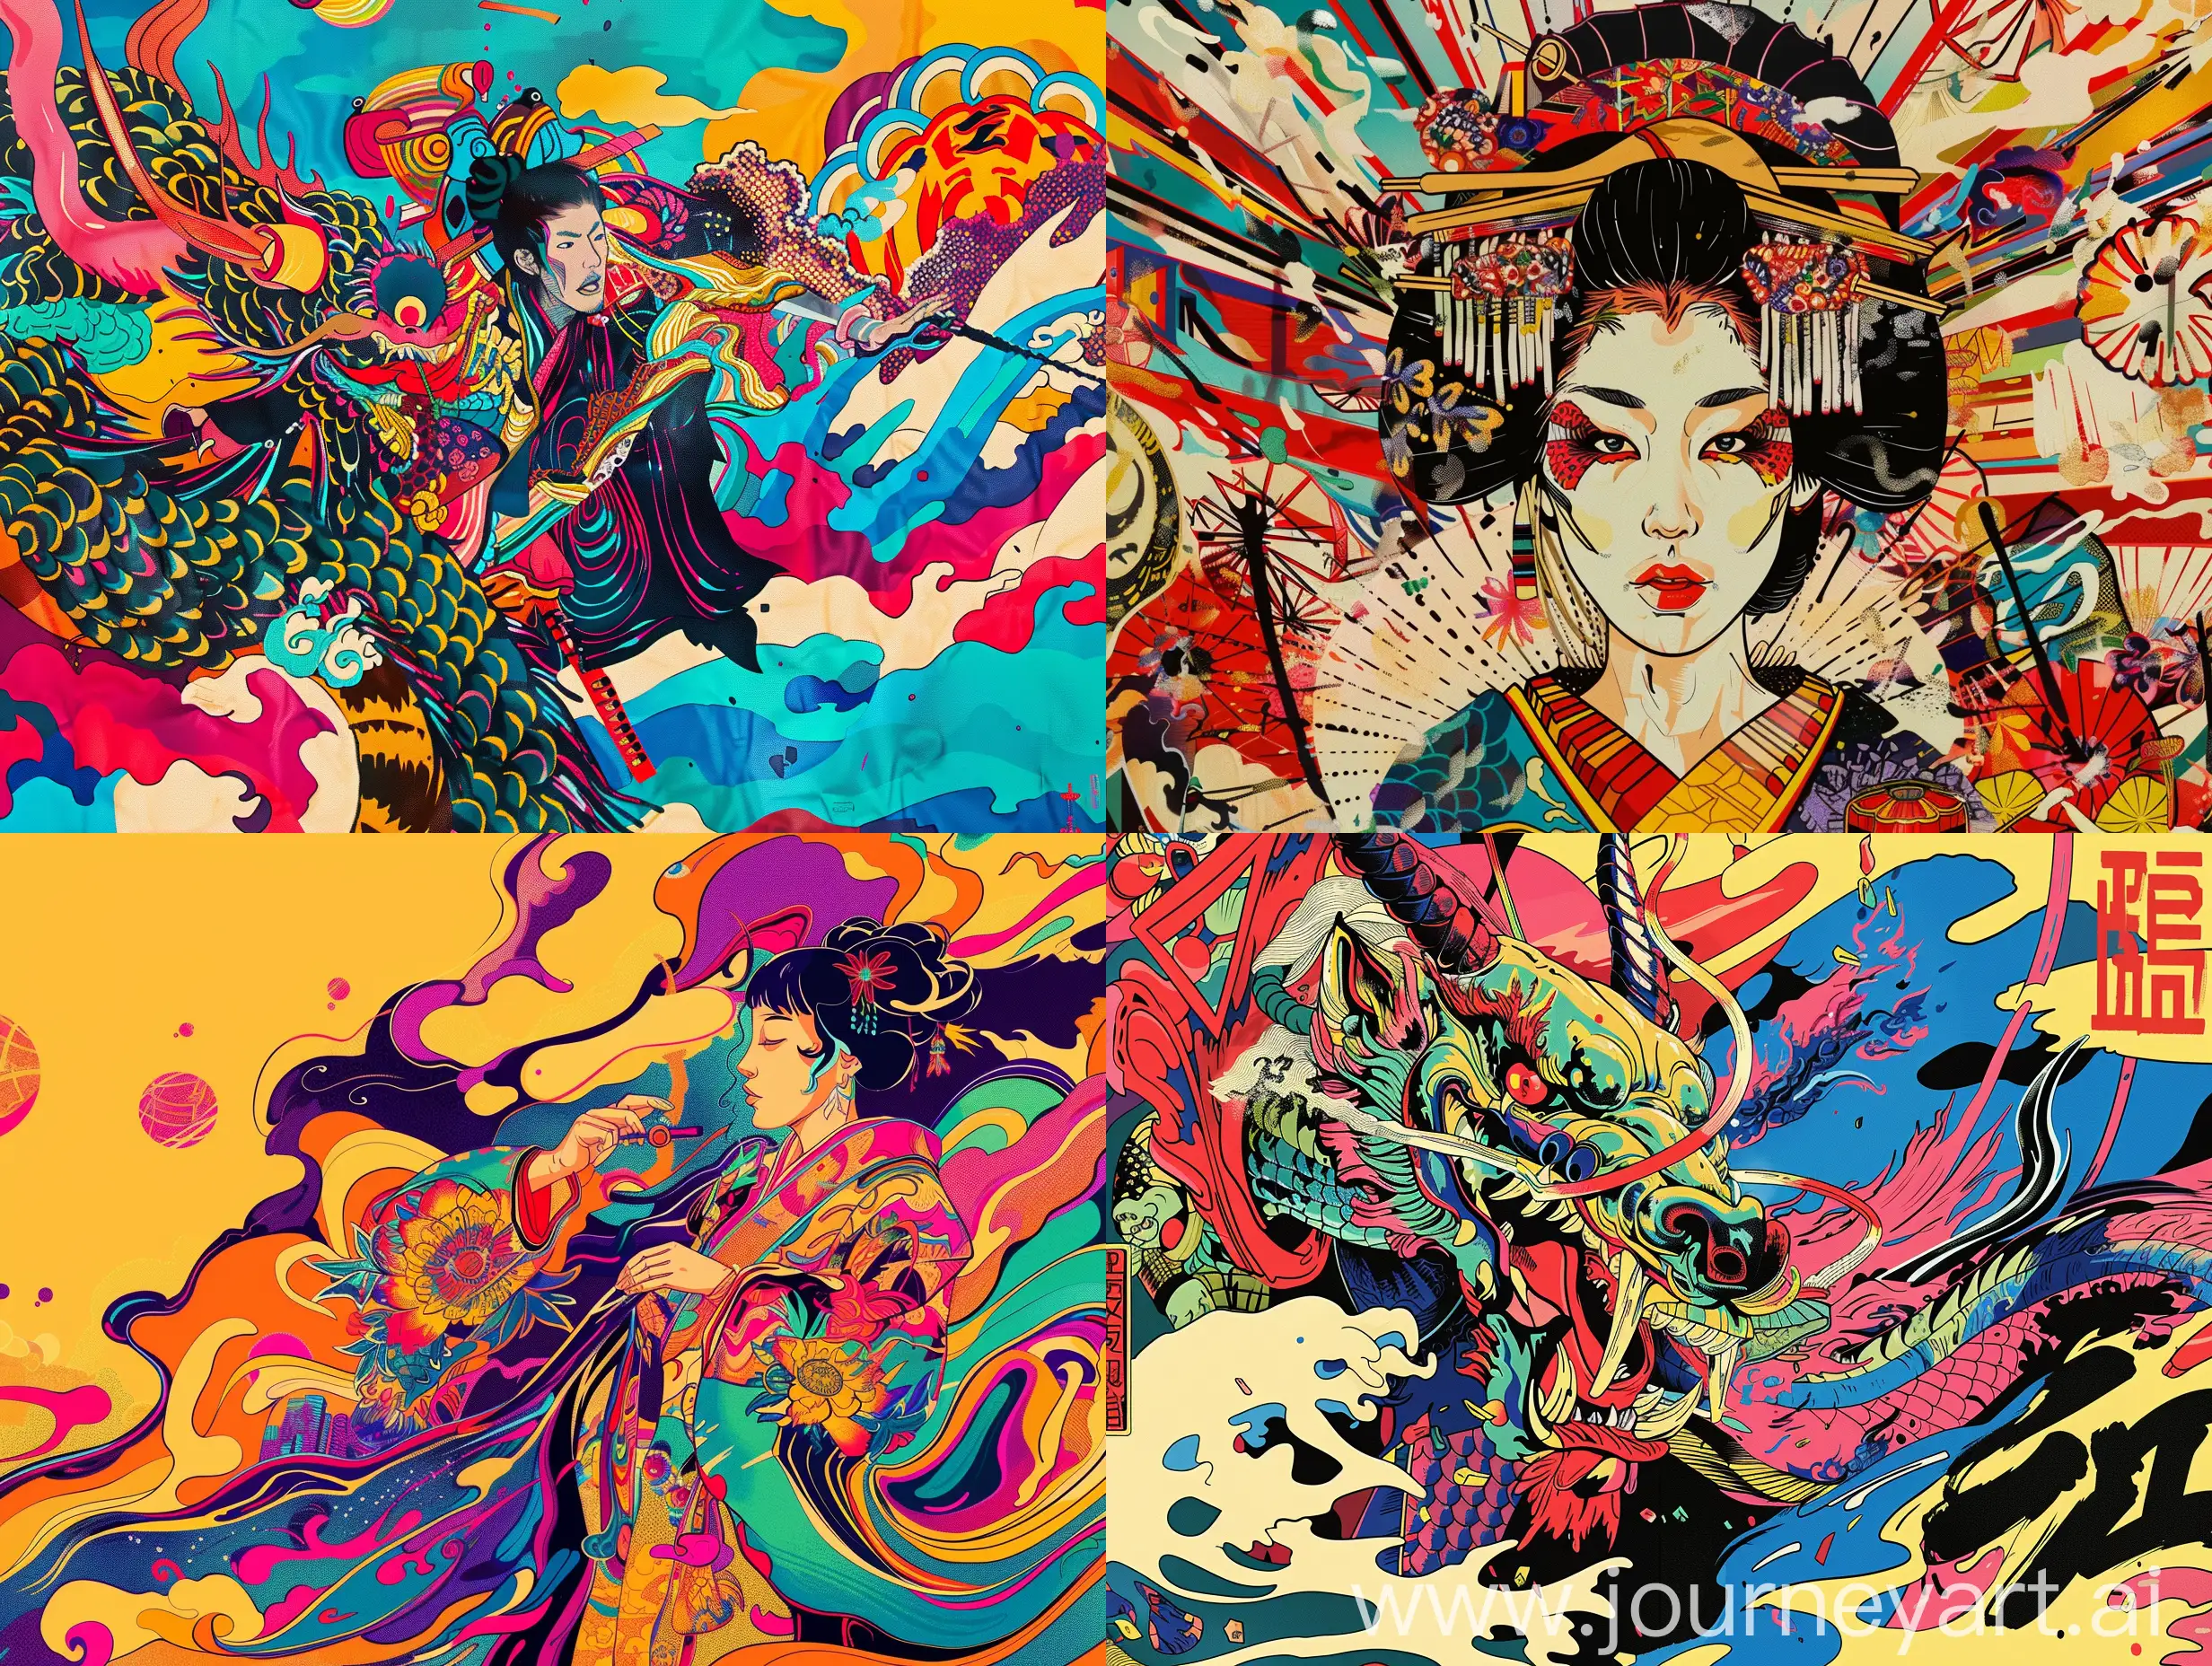 Masterpiece. Best quality. In a style of TV advertising. Colourful Japanese psychedelic advertising. High action modern advertising. Modern Asian psychedelic advertising